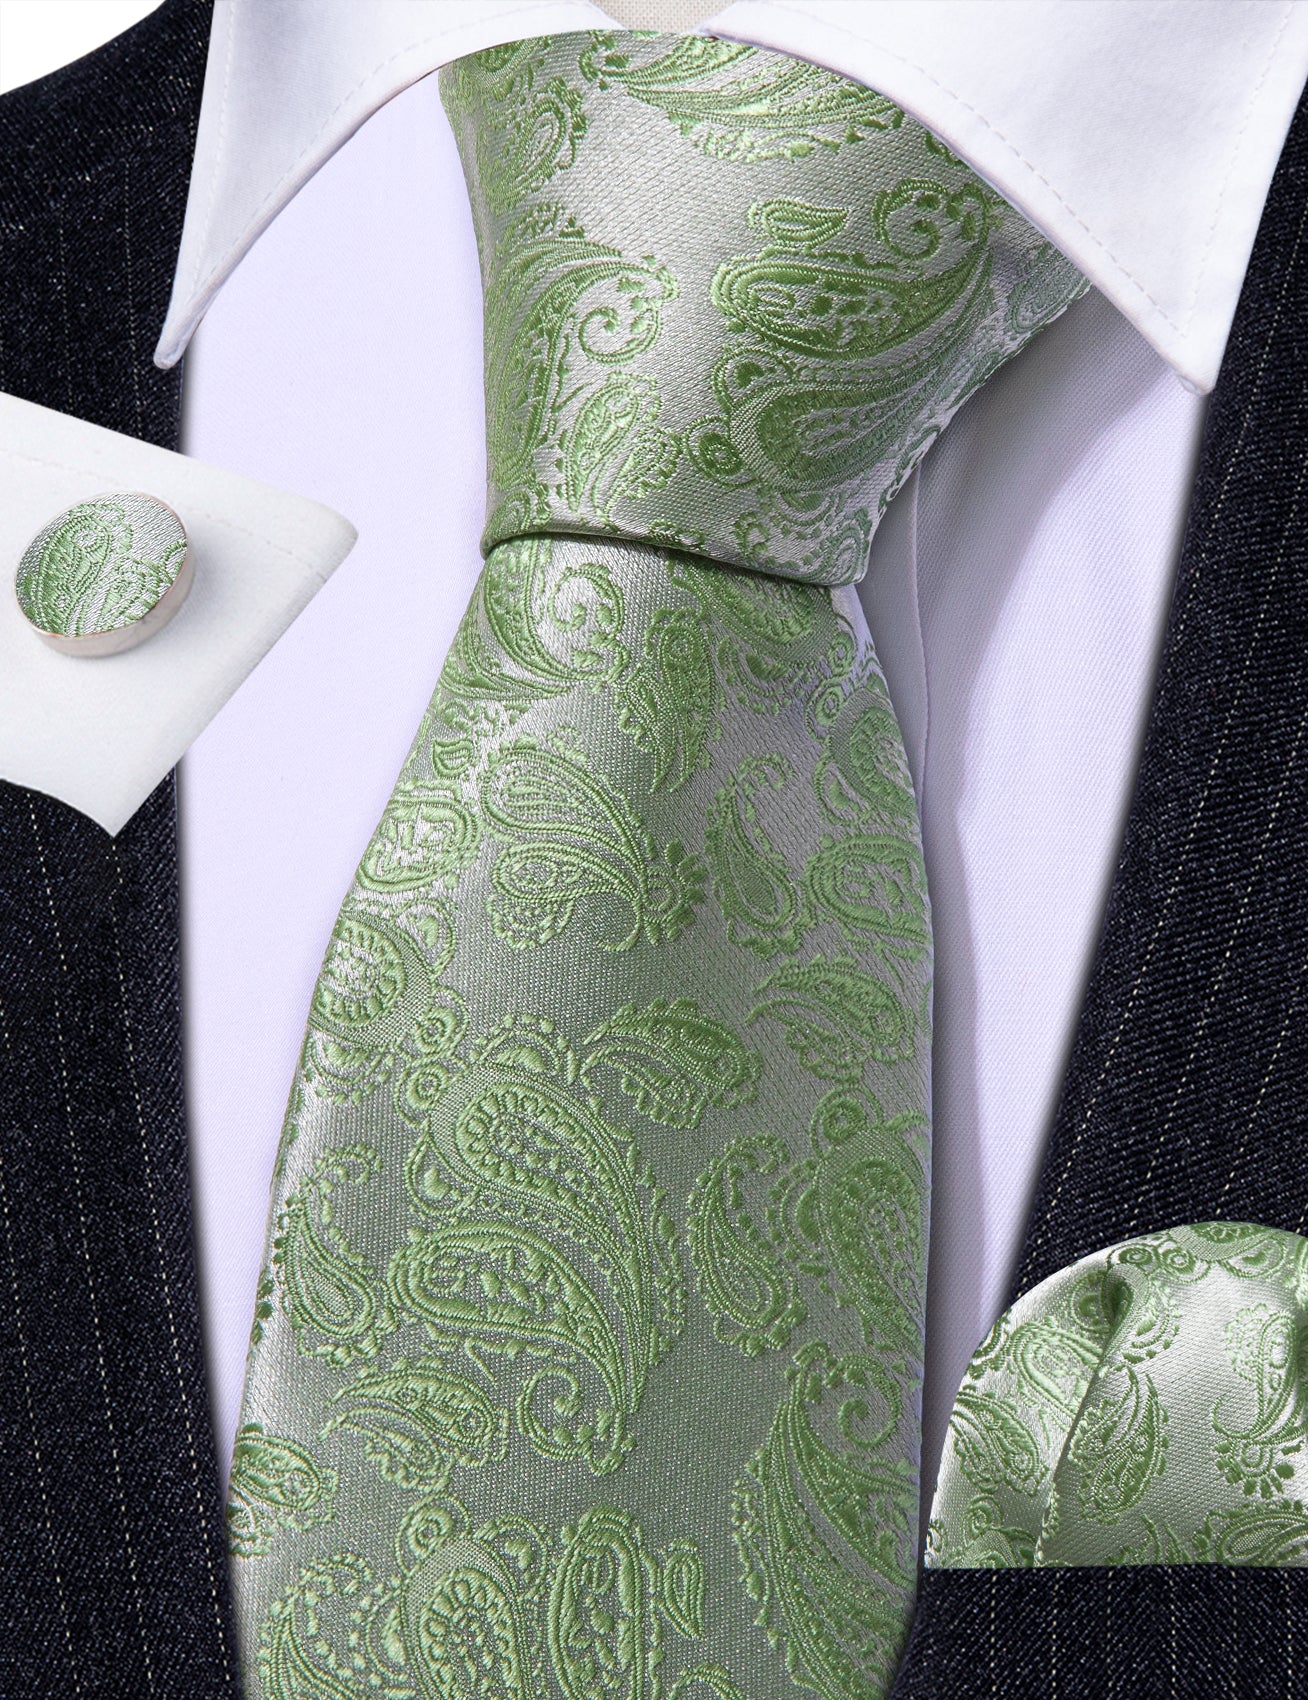 Green Silver Paisley Silk 63 Inches Extra Long Tie Hanky Cufflinks Set